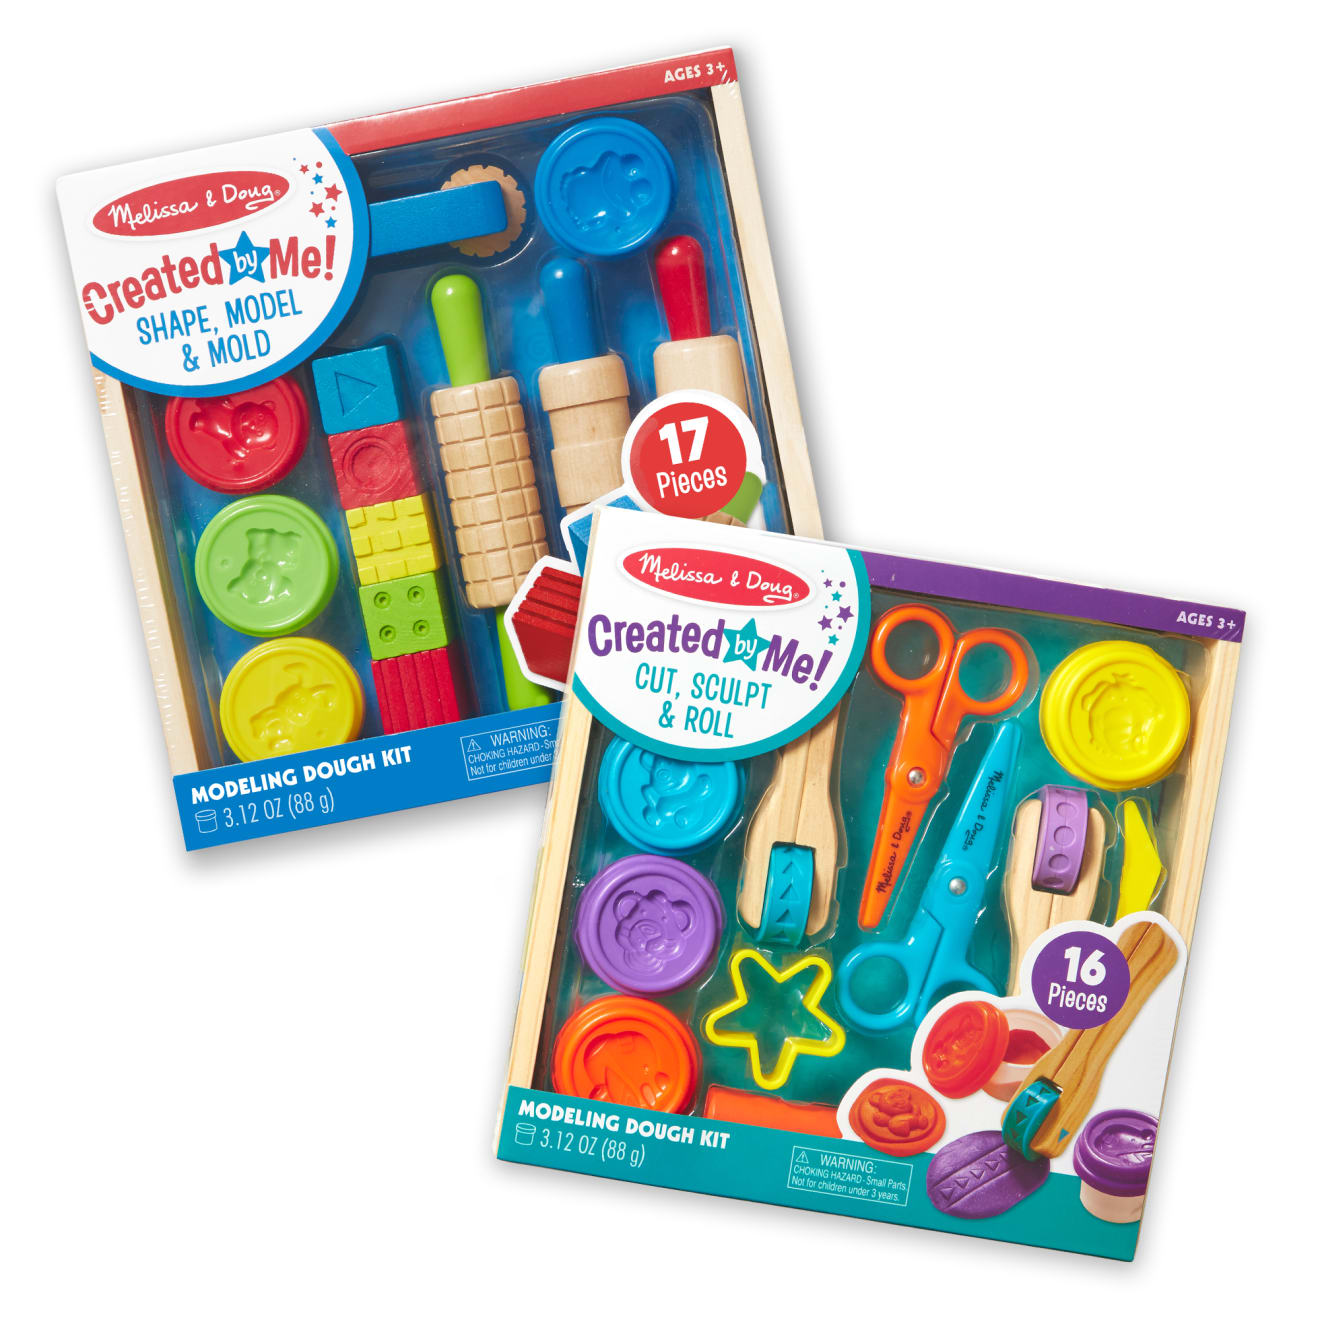 Play Dough Tools with Animal Molds, 45 PCS VS953677 - ToysChoose